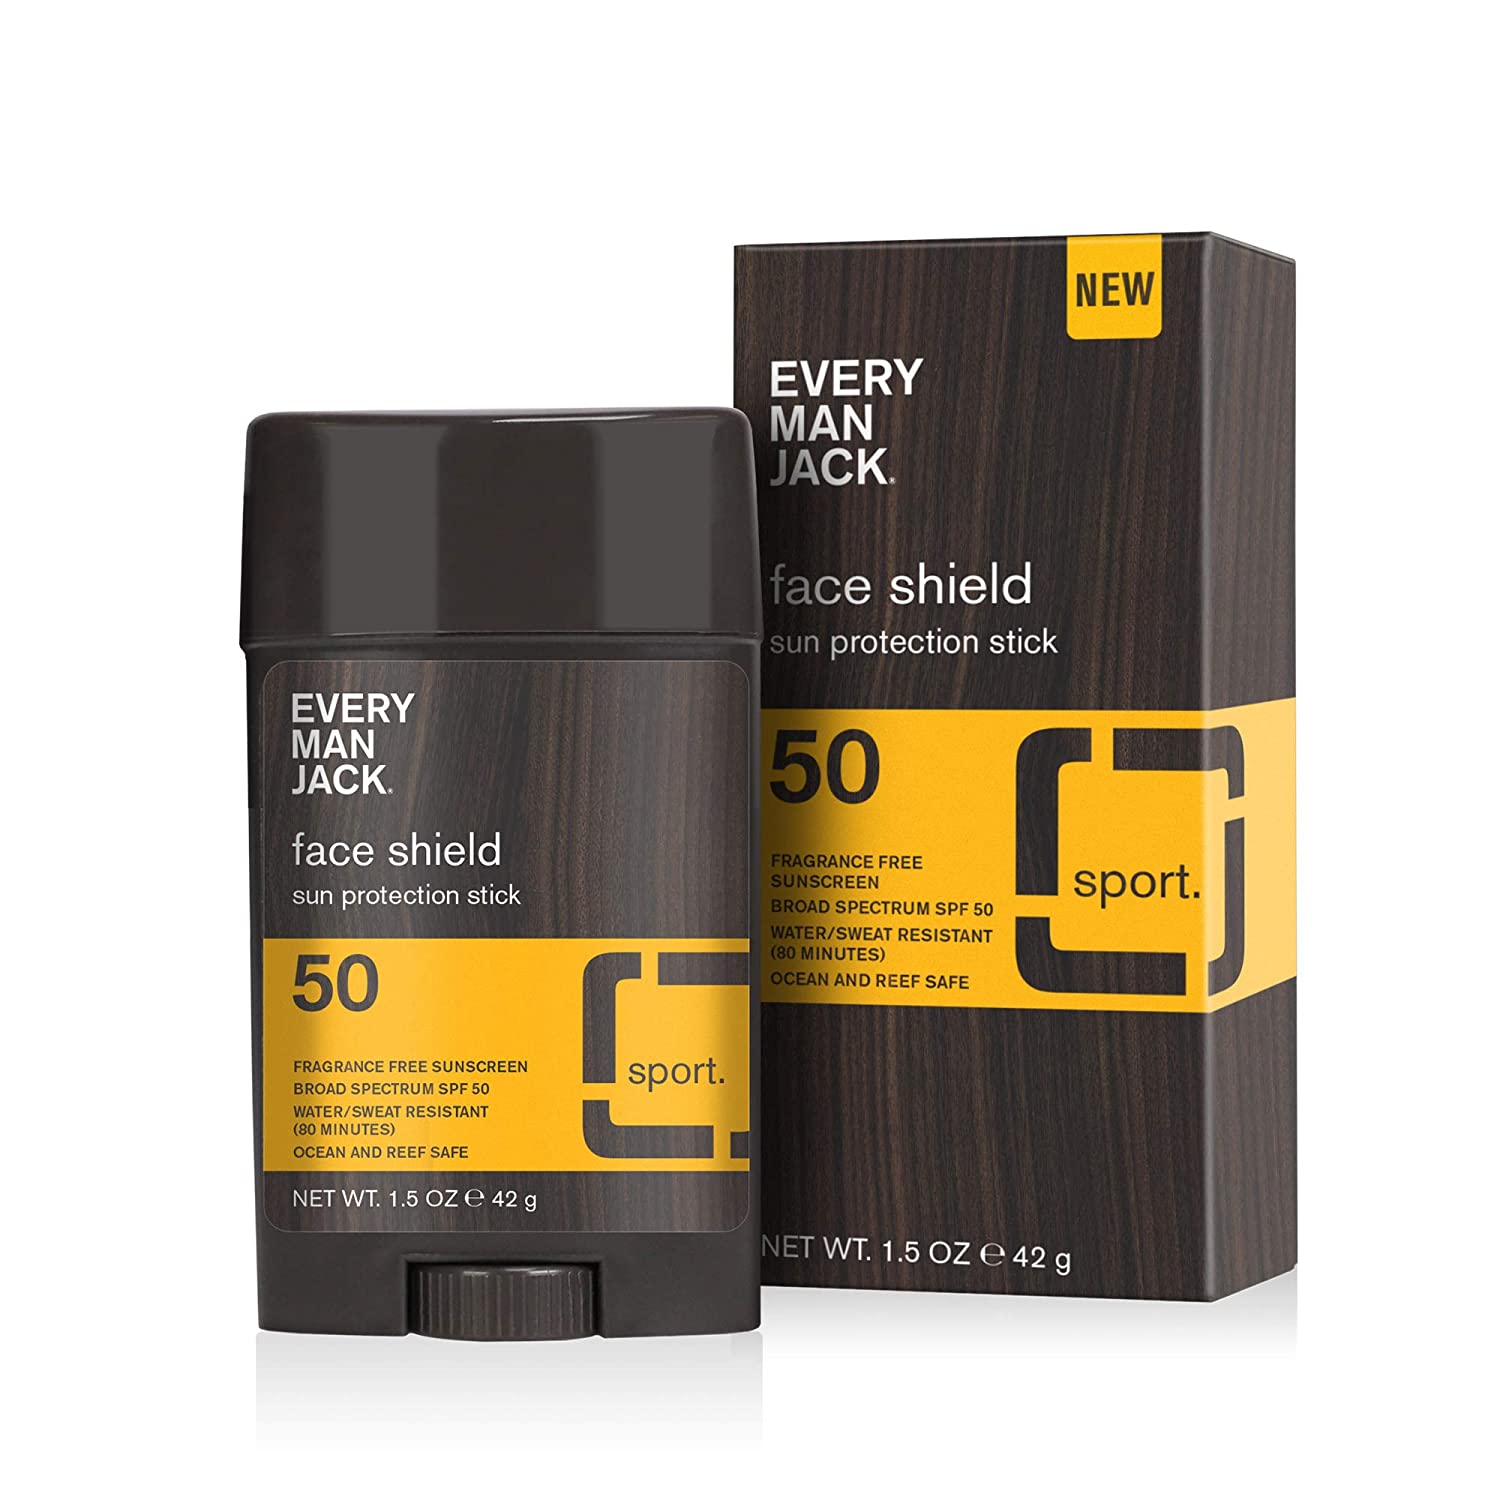 Every Man Jack Sport Sunscreen For Men’s Faces, SPF 50